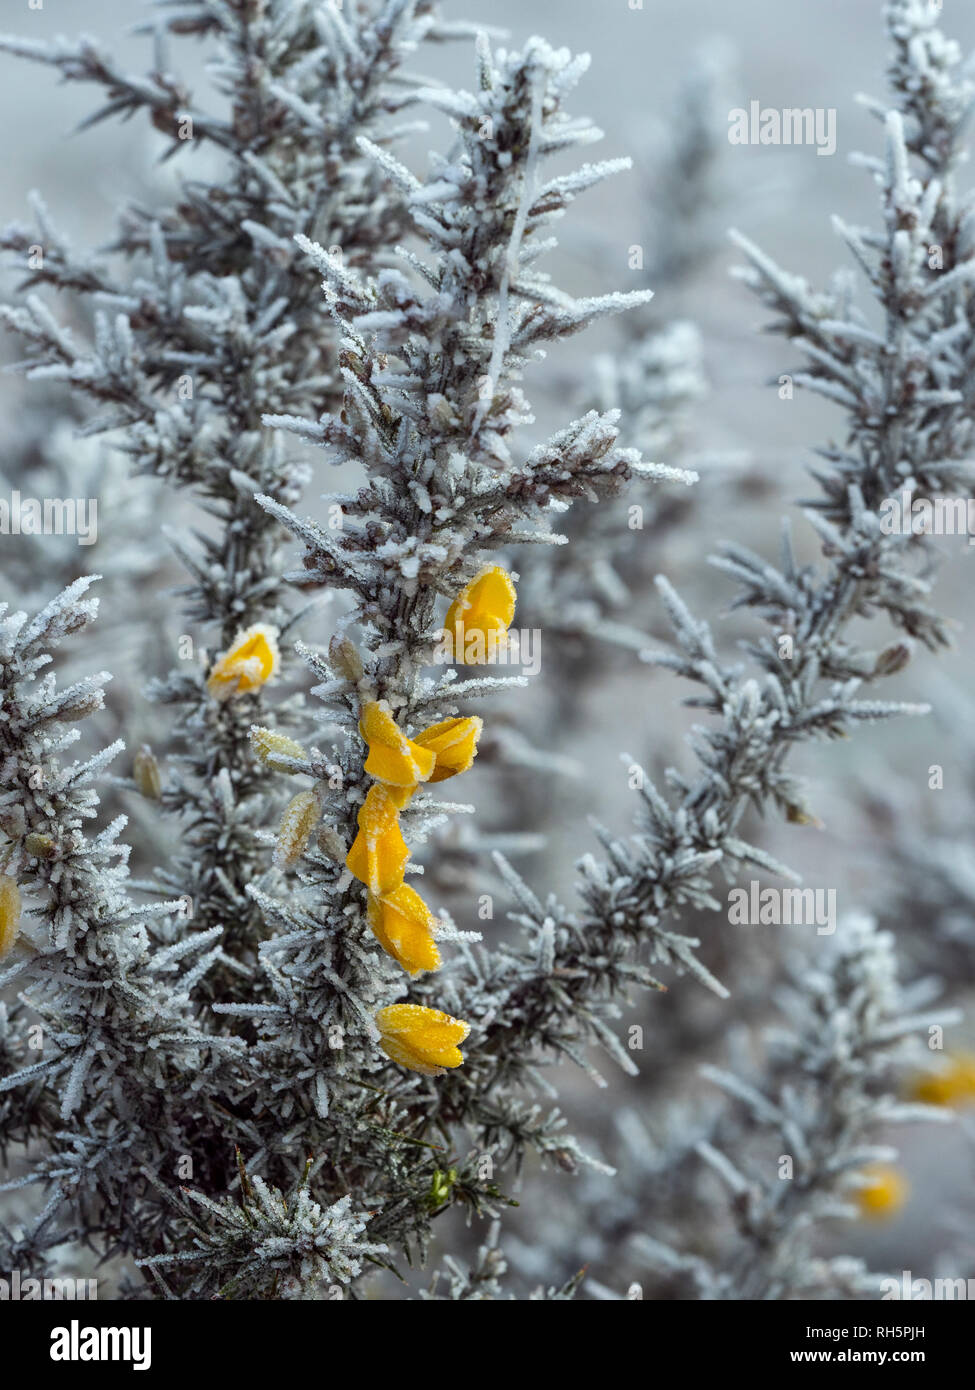 Gorse in flower in mid winter covered in frost and snow Stock Photo